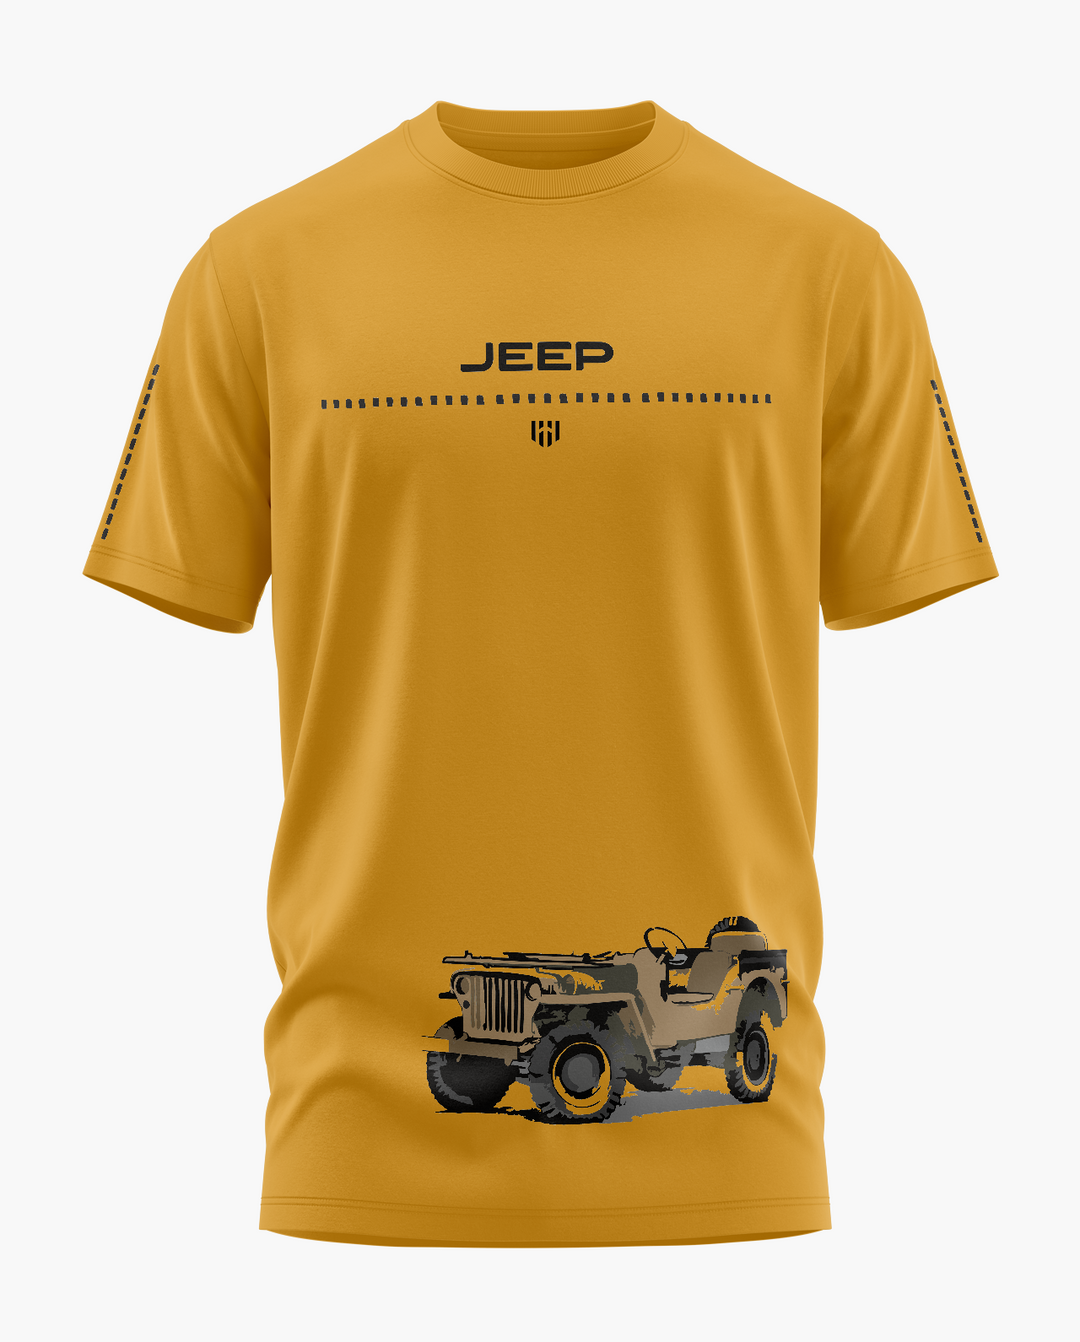 Willy's Jeep T-Shirt - Aero Armour